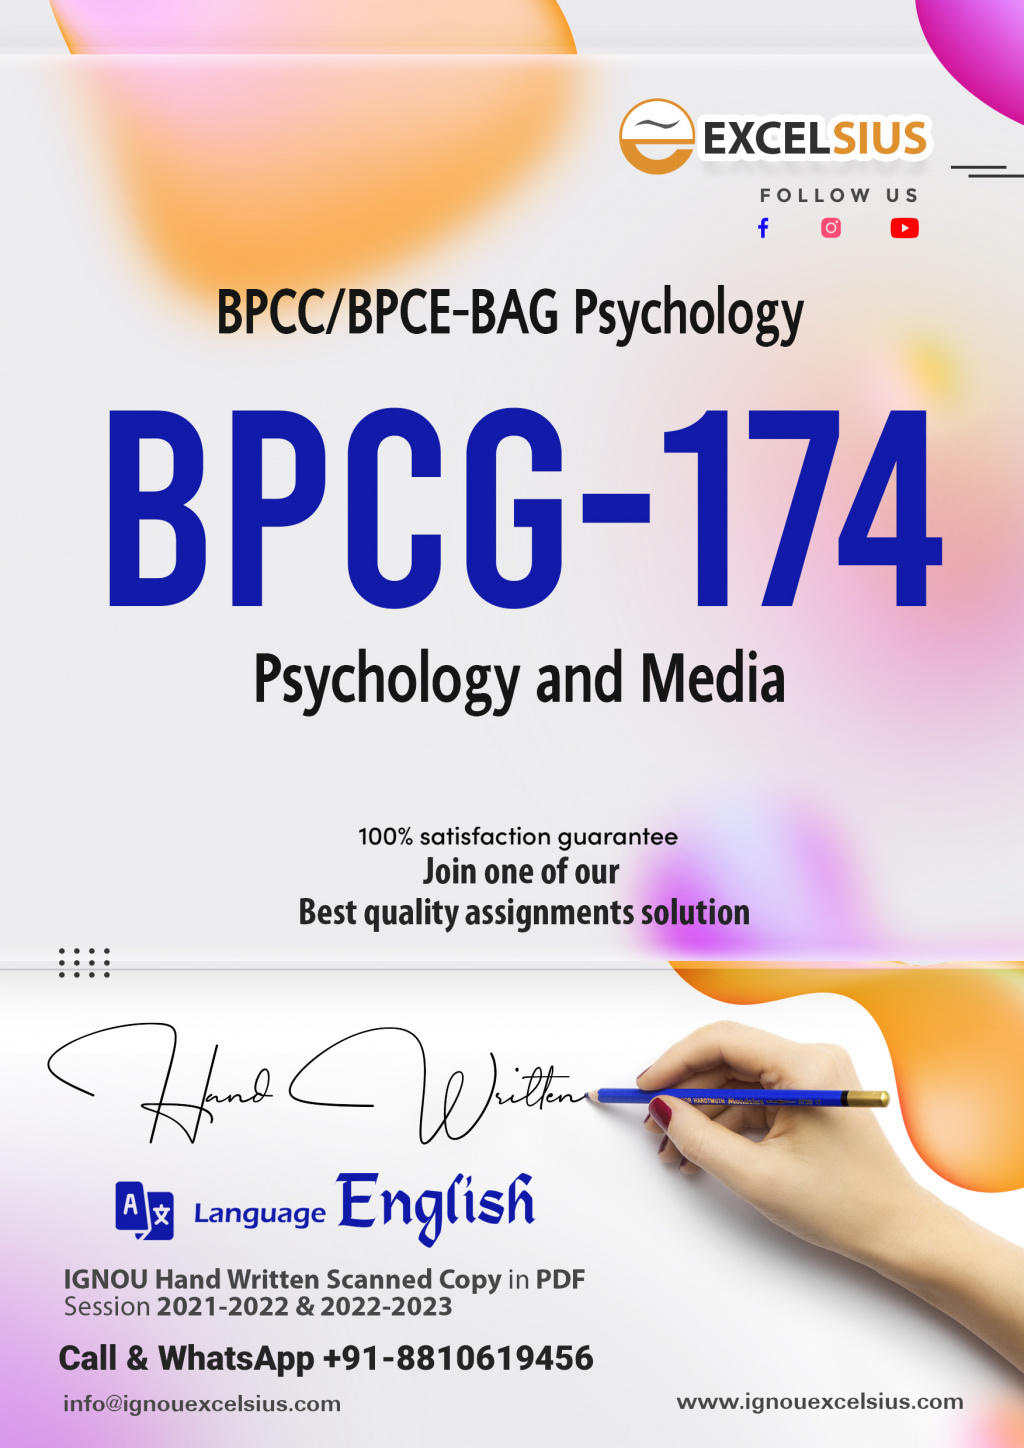 IGNOU BPCG-174 - Psychology and Media, Latest Solved Assignment-July 2022 – January 2023